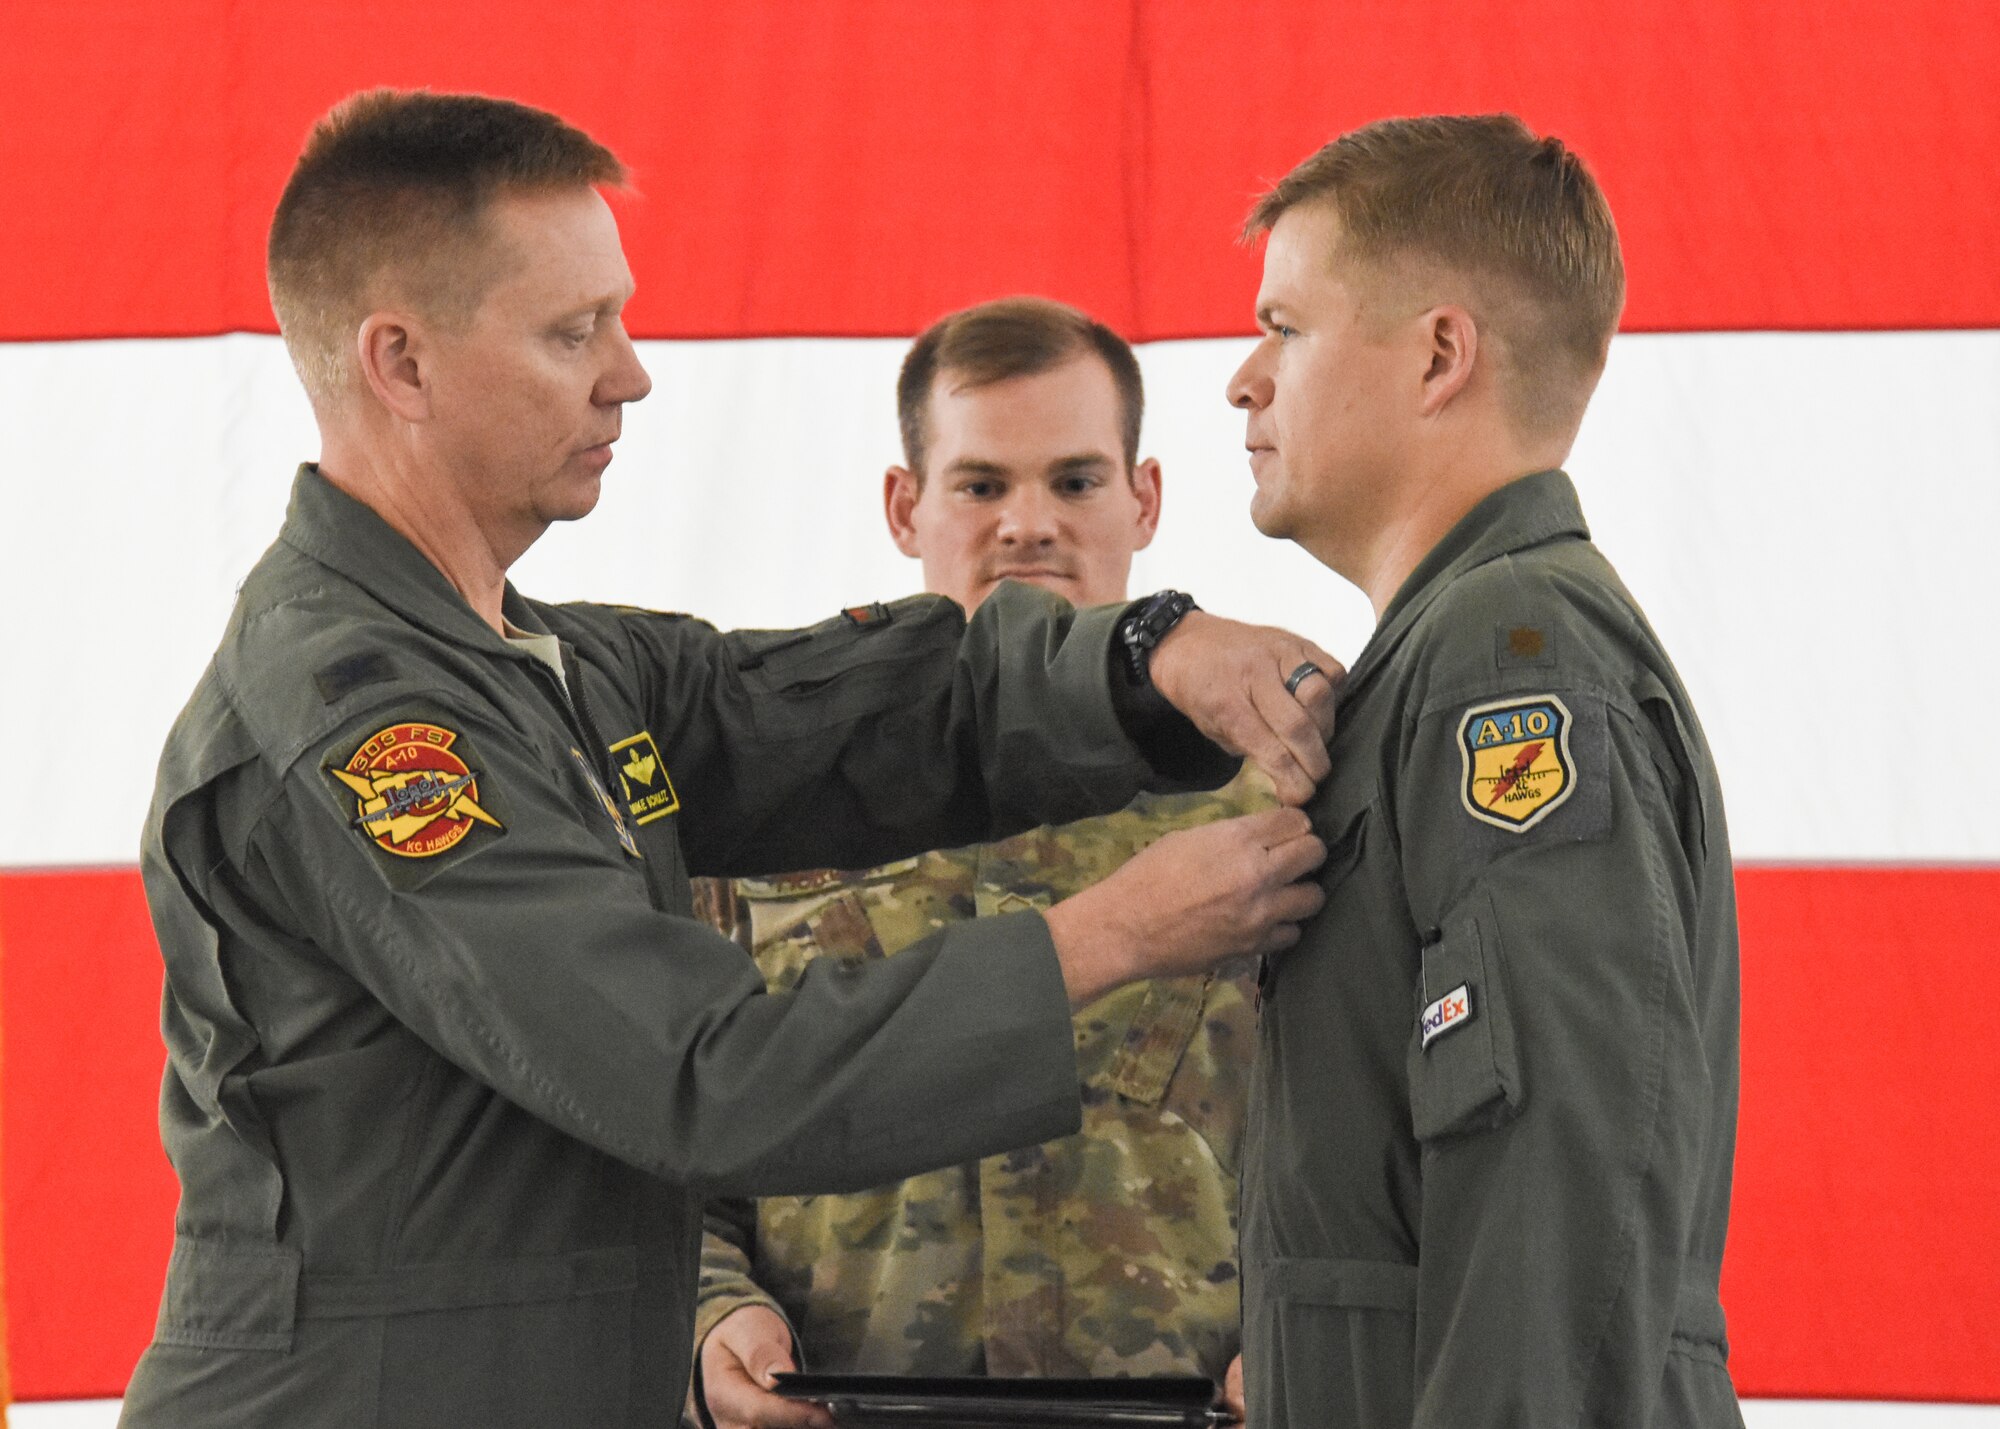 Col. Mike Schultz, commander of the 442d Fighter Wing, pins the Distinguished Flying Cross on Maj. John Tice, a flight commander with the 303d Fighter Squadron, during a ceremony at Whiteman Air Force Base, Mo., Nov. 2, 2019. Tice, a prior-enlisted Army combat engineer, earned the DFC during a combat mission flown in Afghanistan that resulted in 32 enemy combatants killed in action.